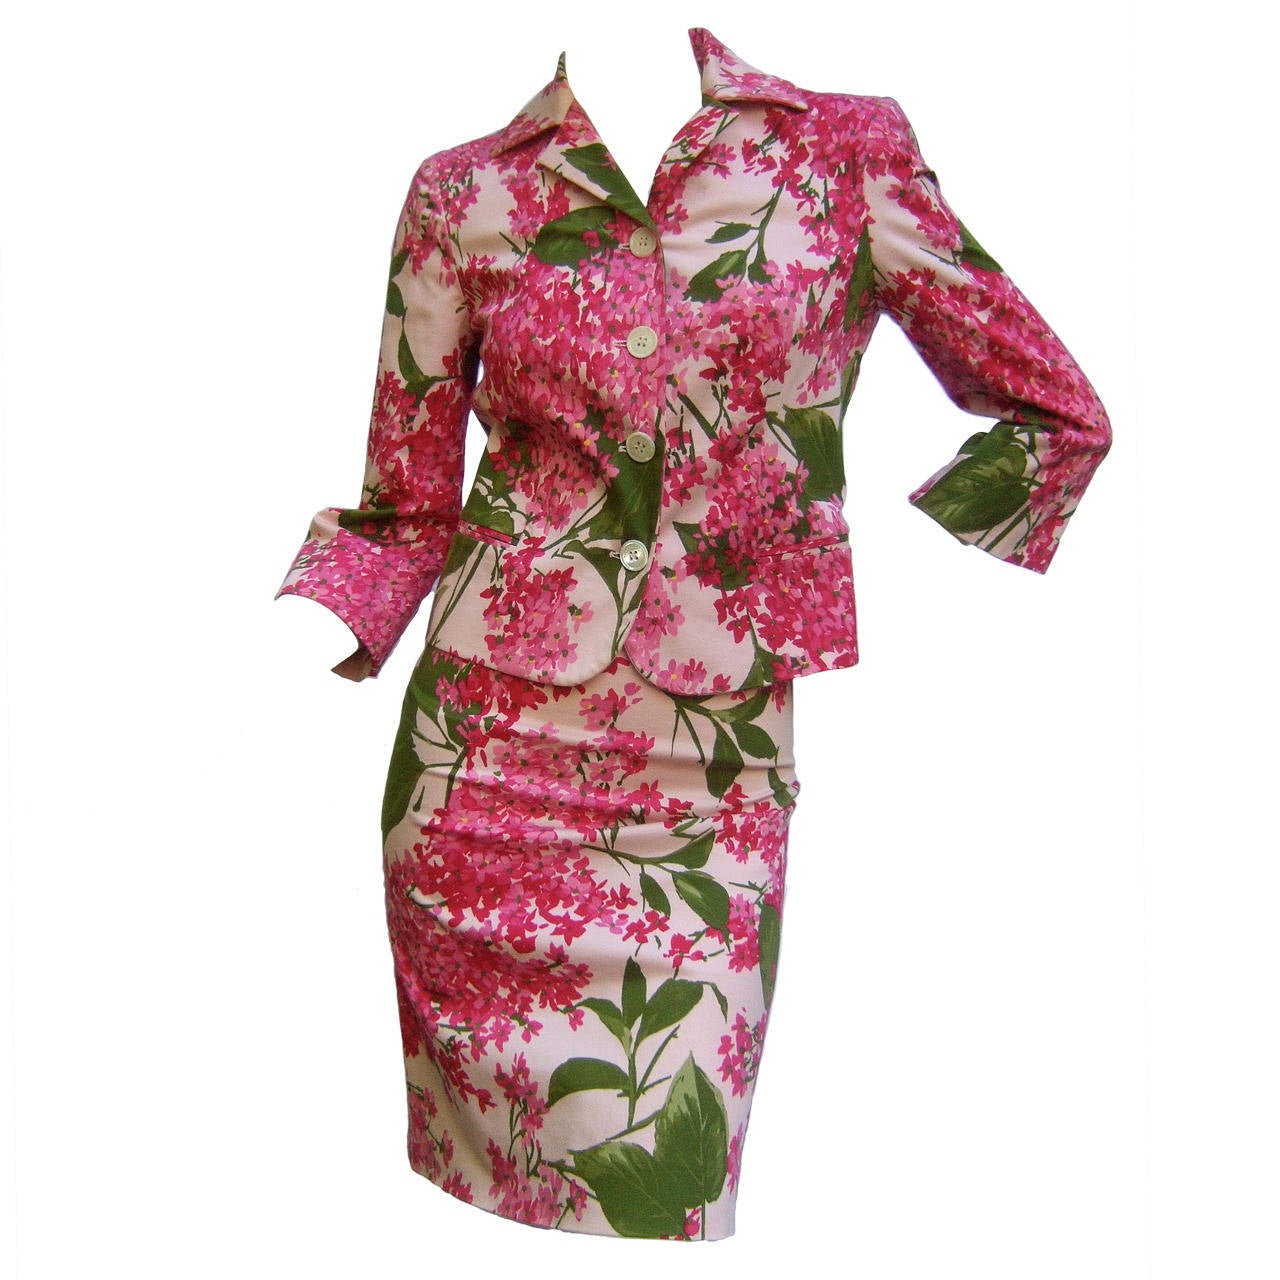 Moschino Italy Floral Print Cotton Skirt Suit Cheap and Chic US Size 4 ...